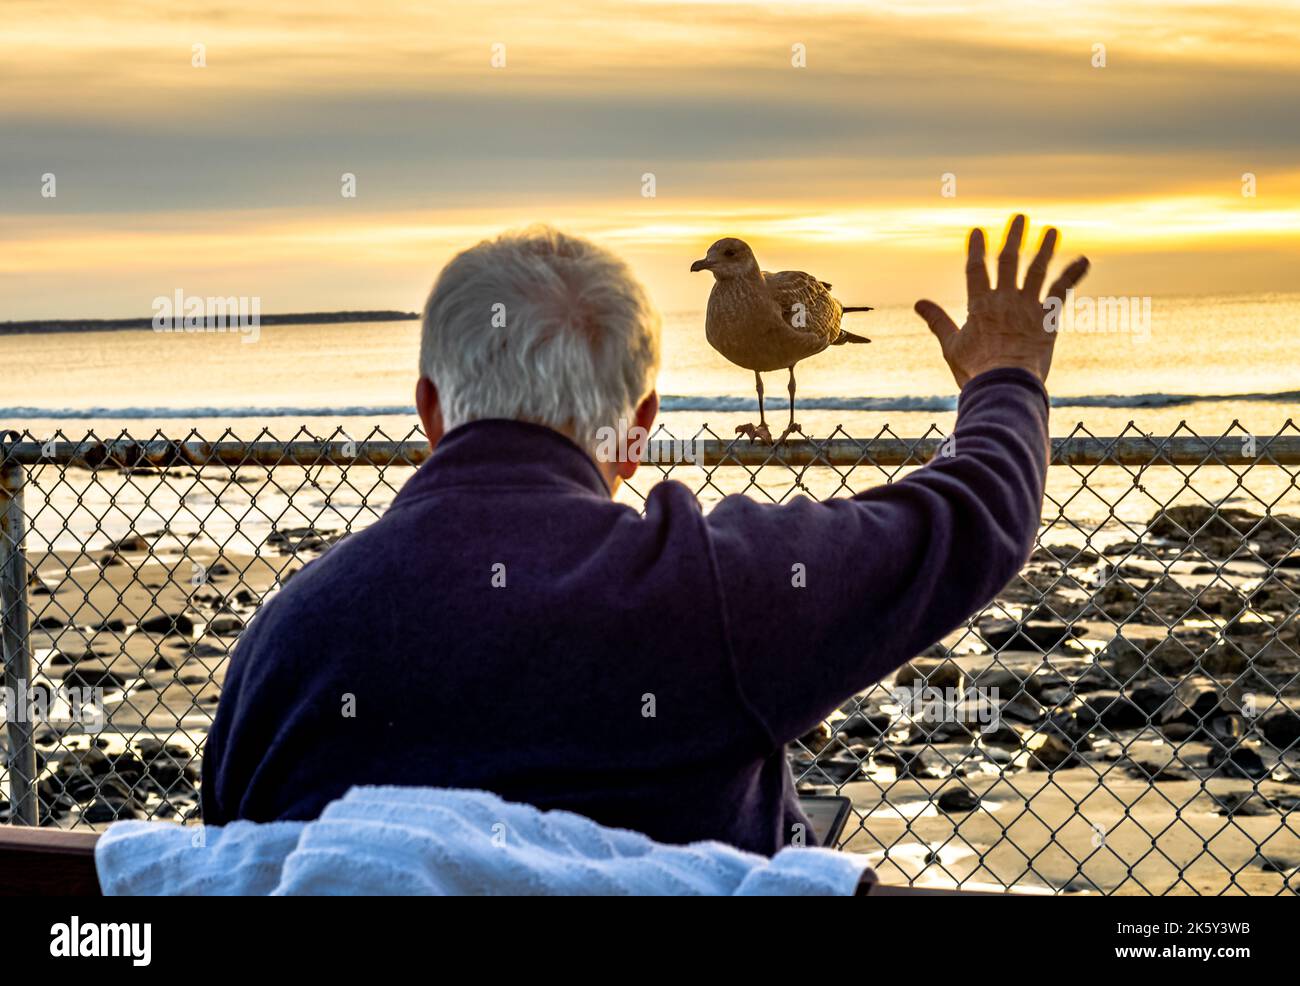 Good morning my friend. This man watching the morning sunrise, is greatly surprised when a Seagull landed on the fence right in front of him. Stock Photo